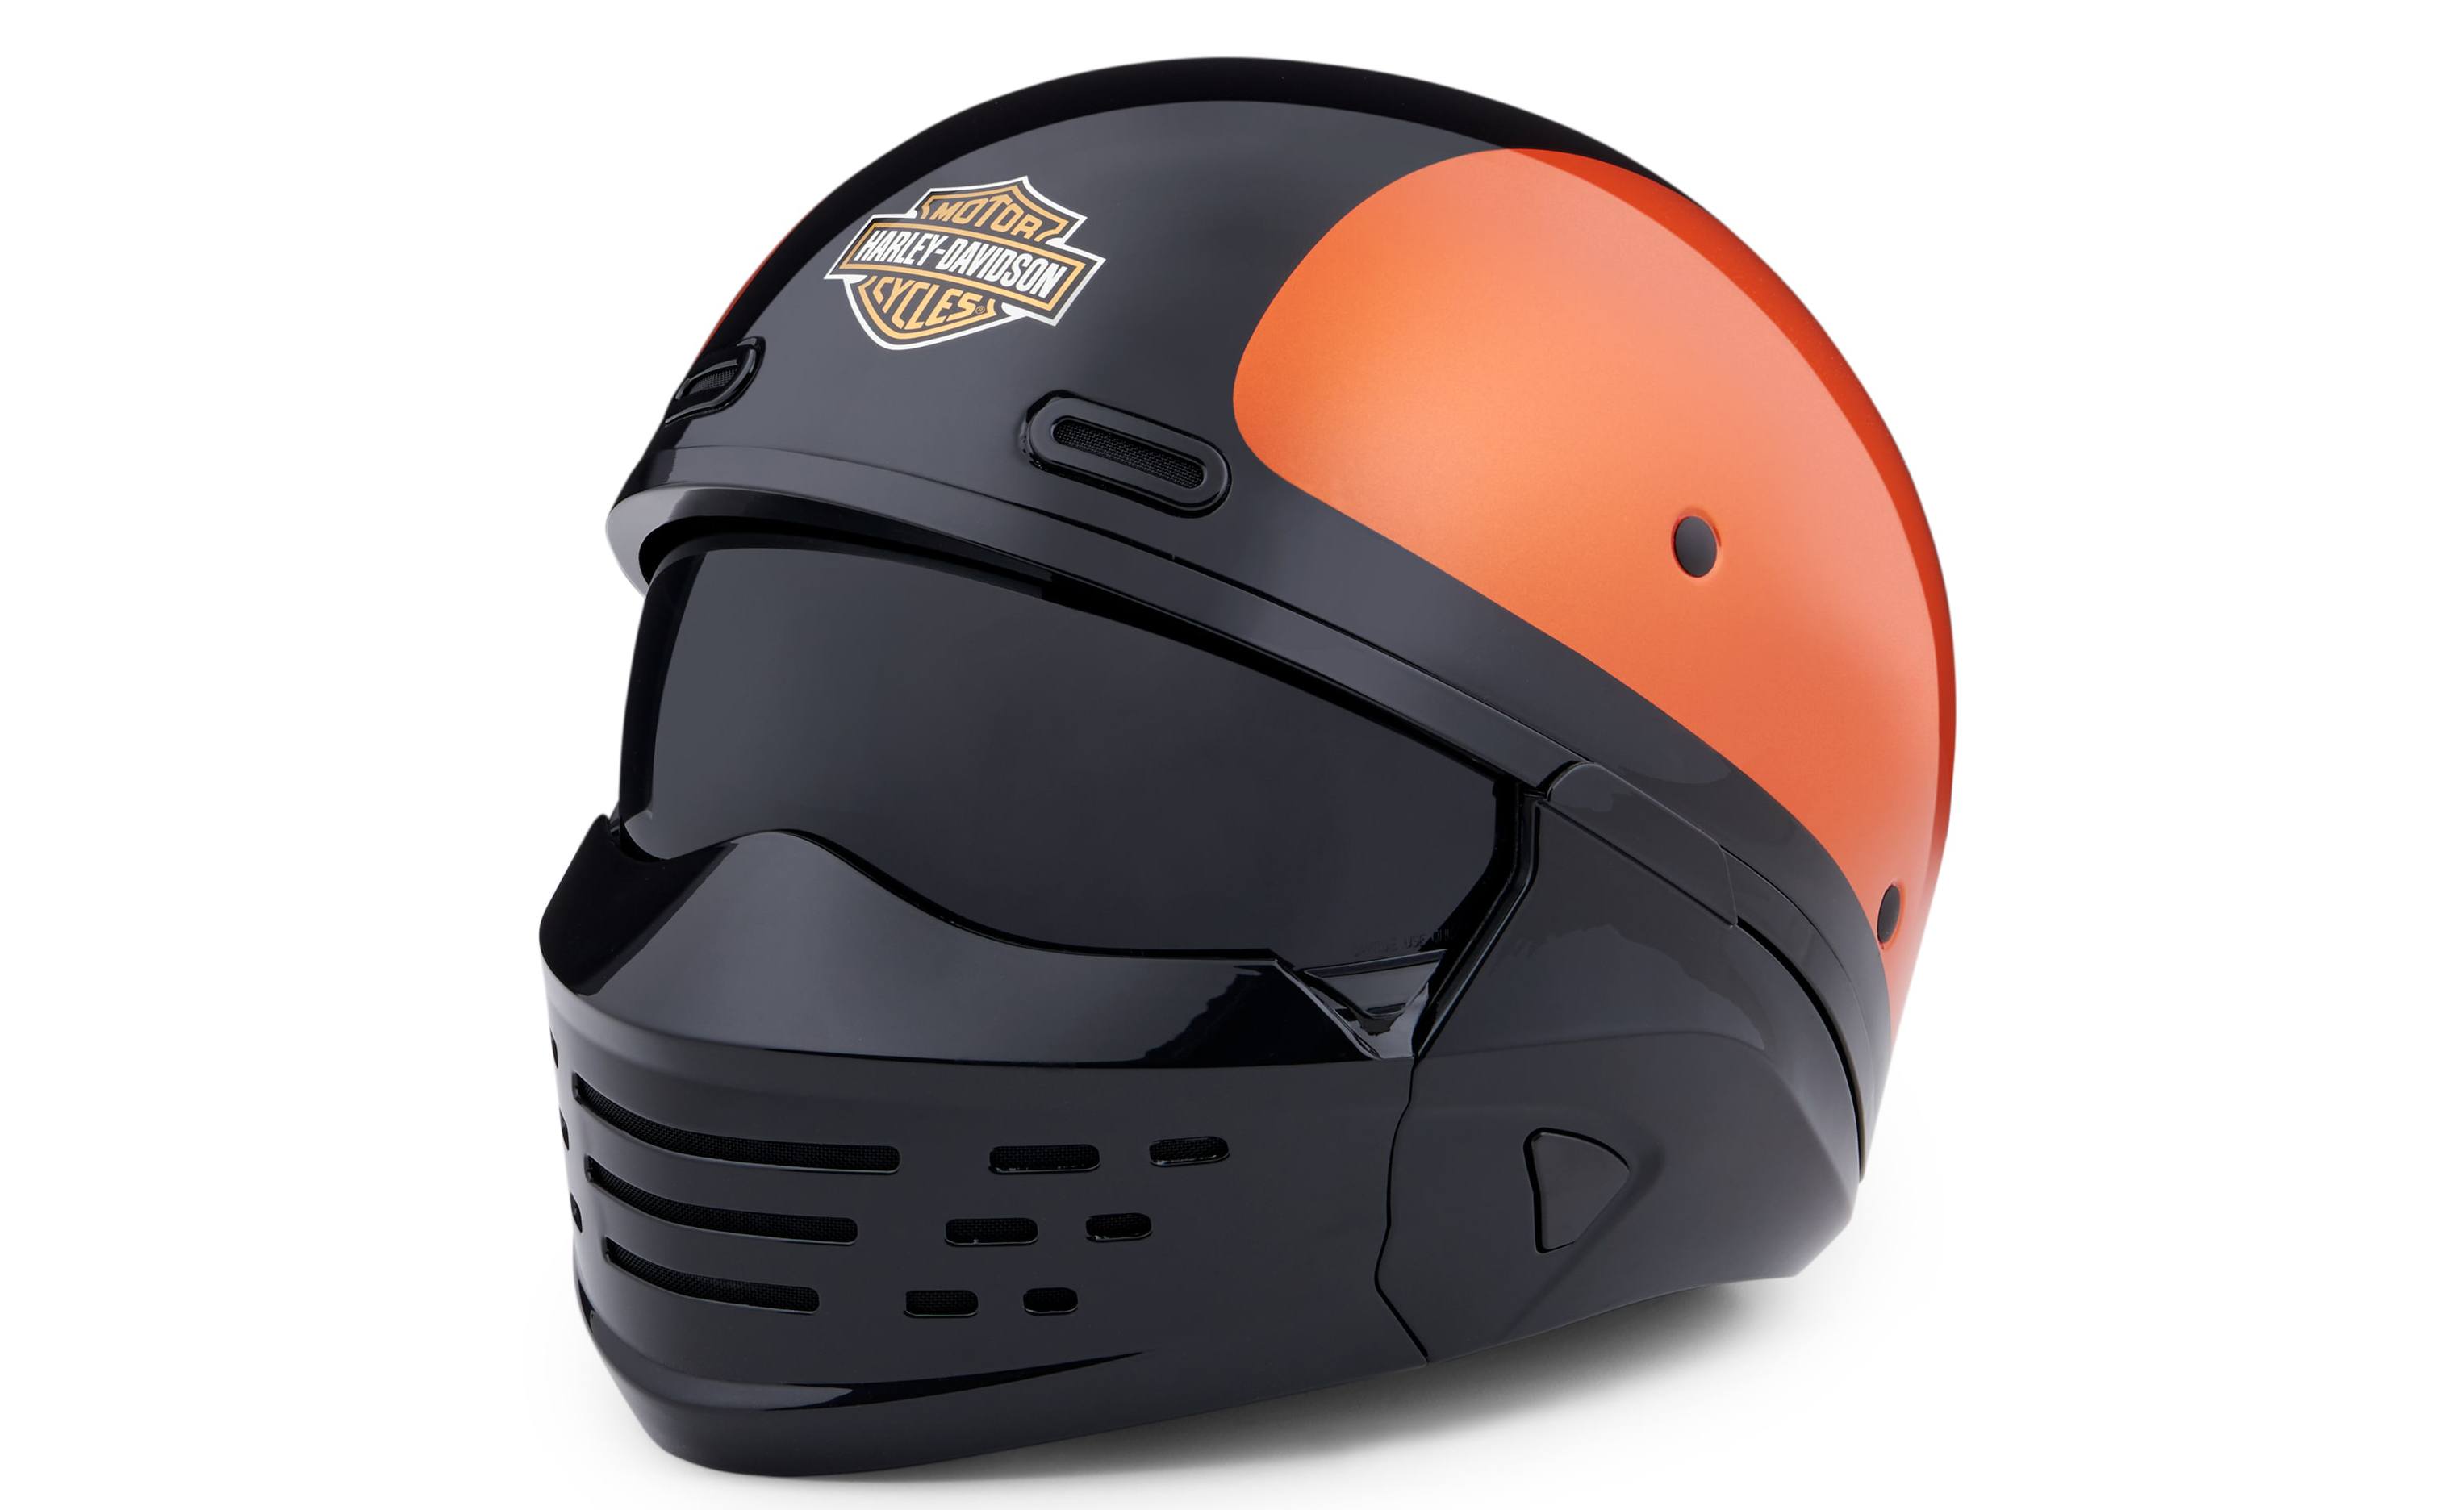 Detail Images Of Motorcycle Helmets Nomer 29